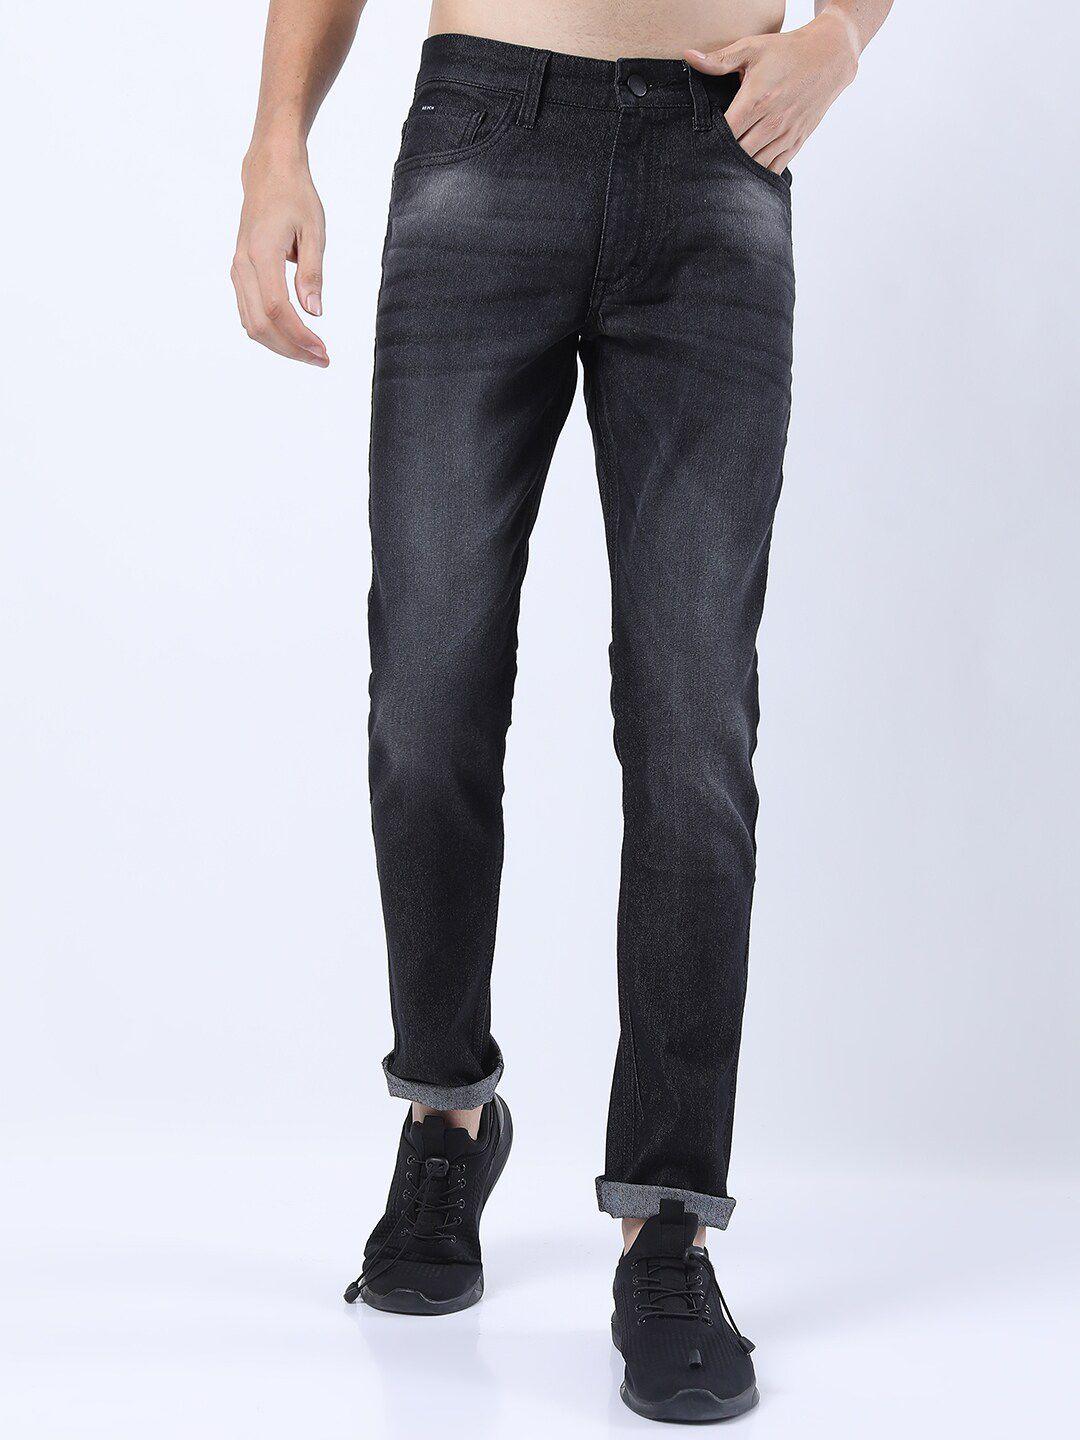 ketch-men-charcoal-slim-fit-mid-rise-light-fade-stretchable-jeans